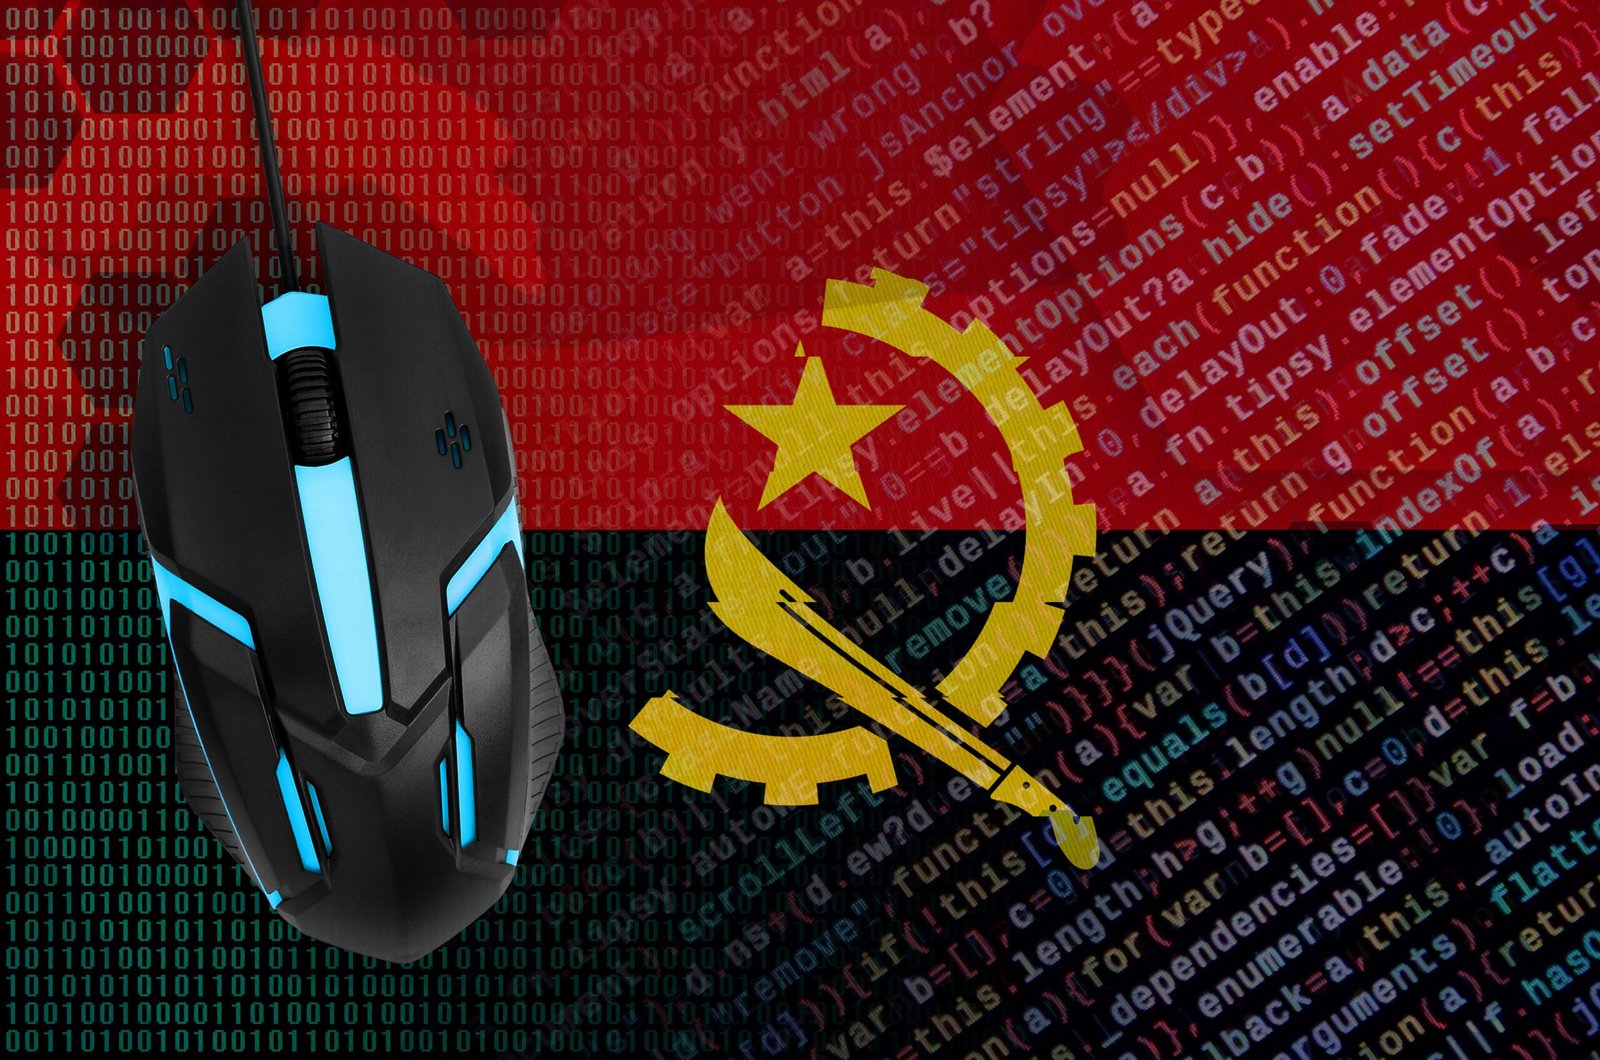 Angola Marks Technology Advancements With Cybersecurity Academy Plans – Source: www.darkreading.com